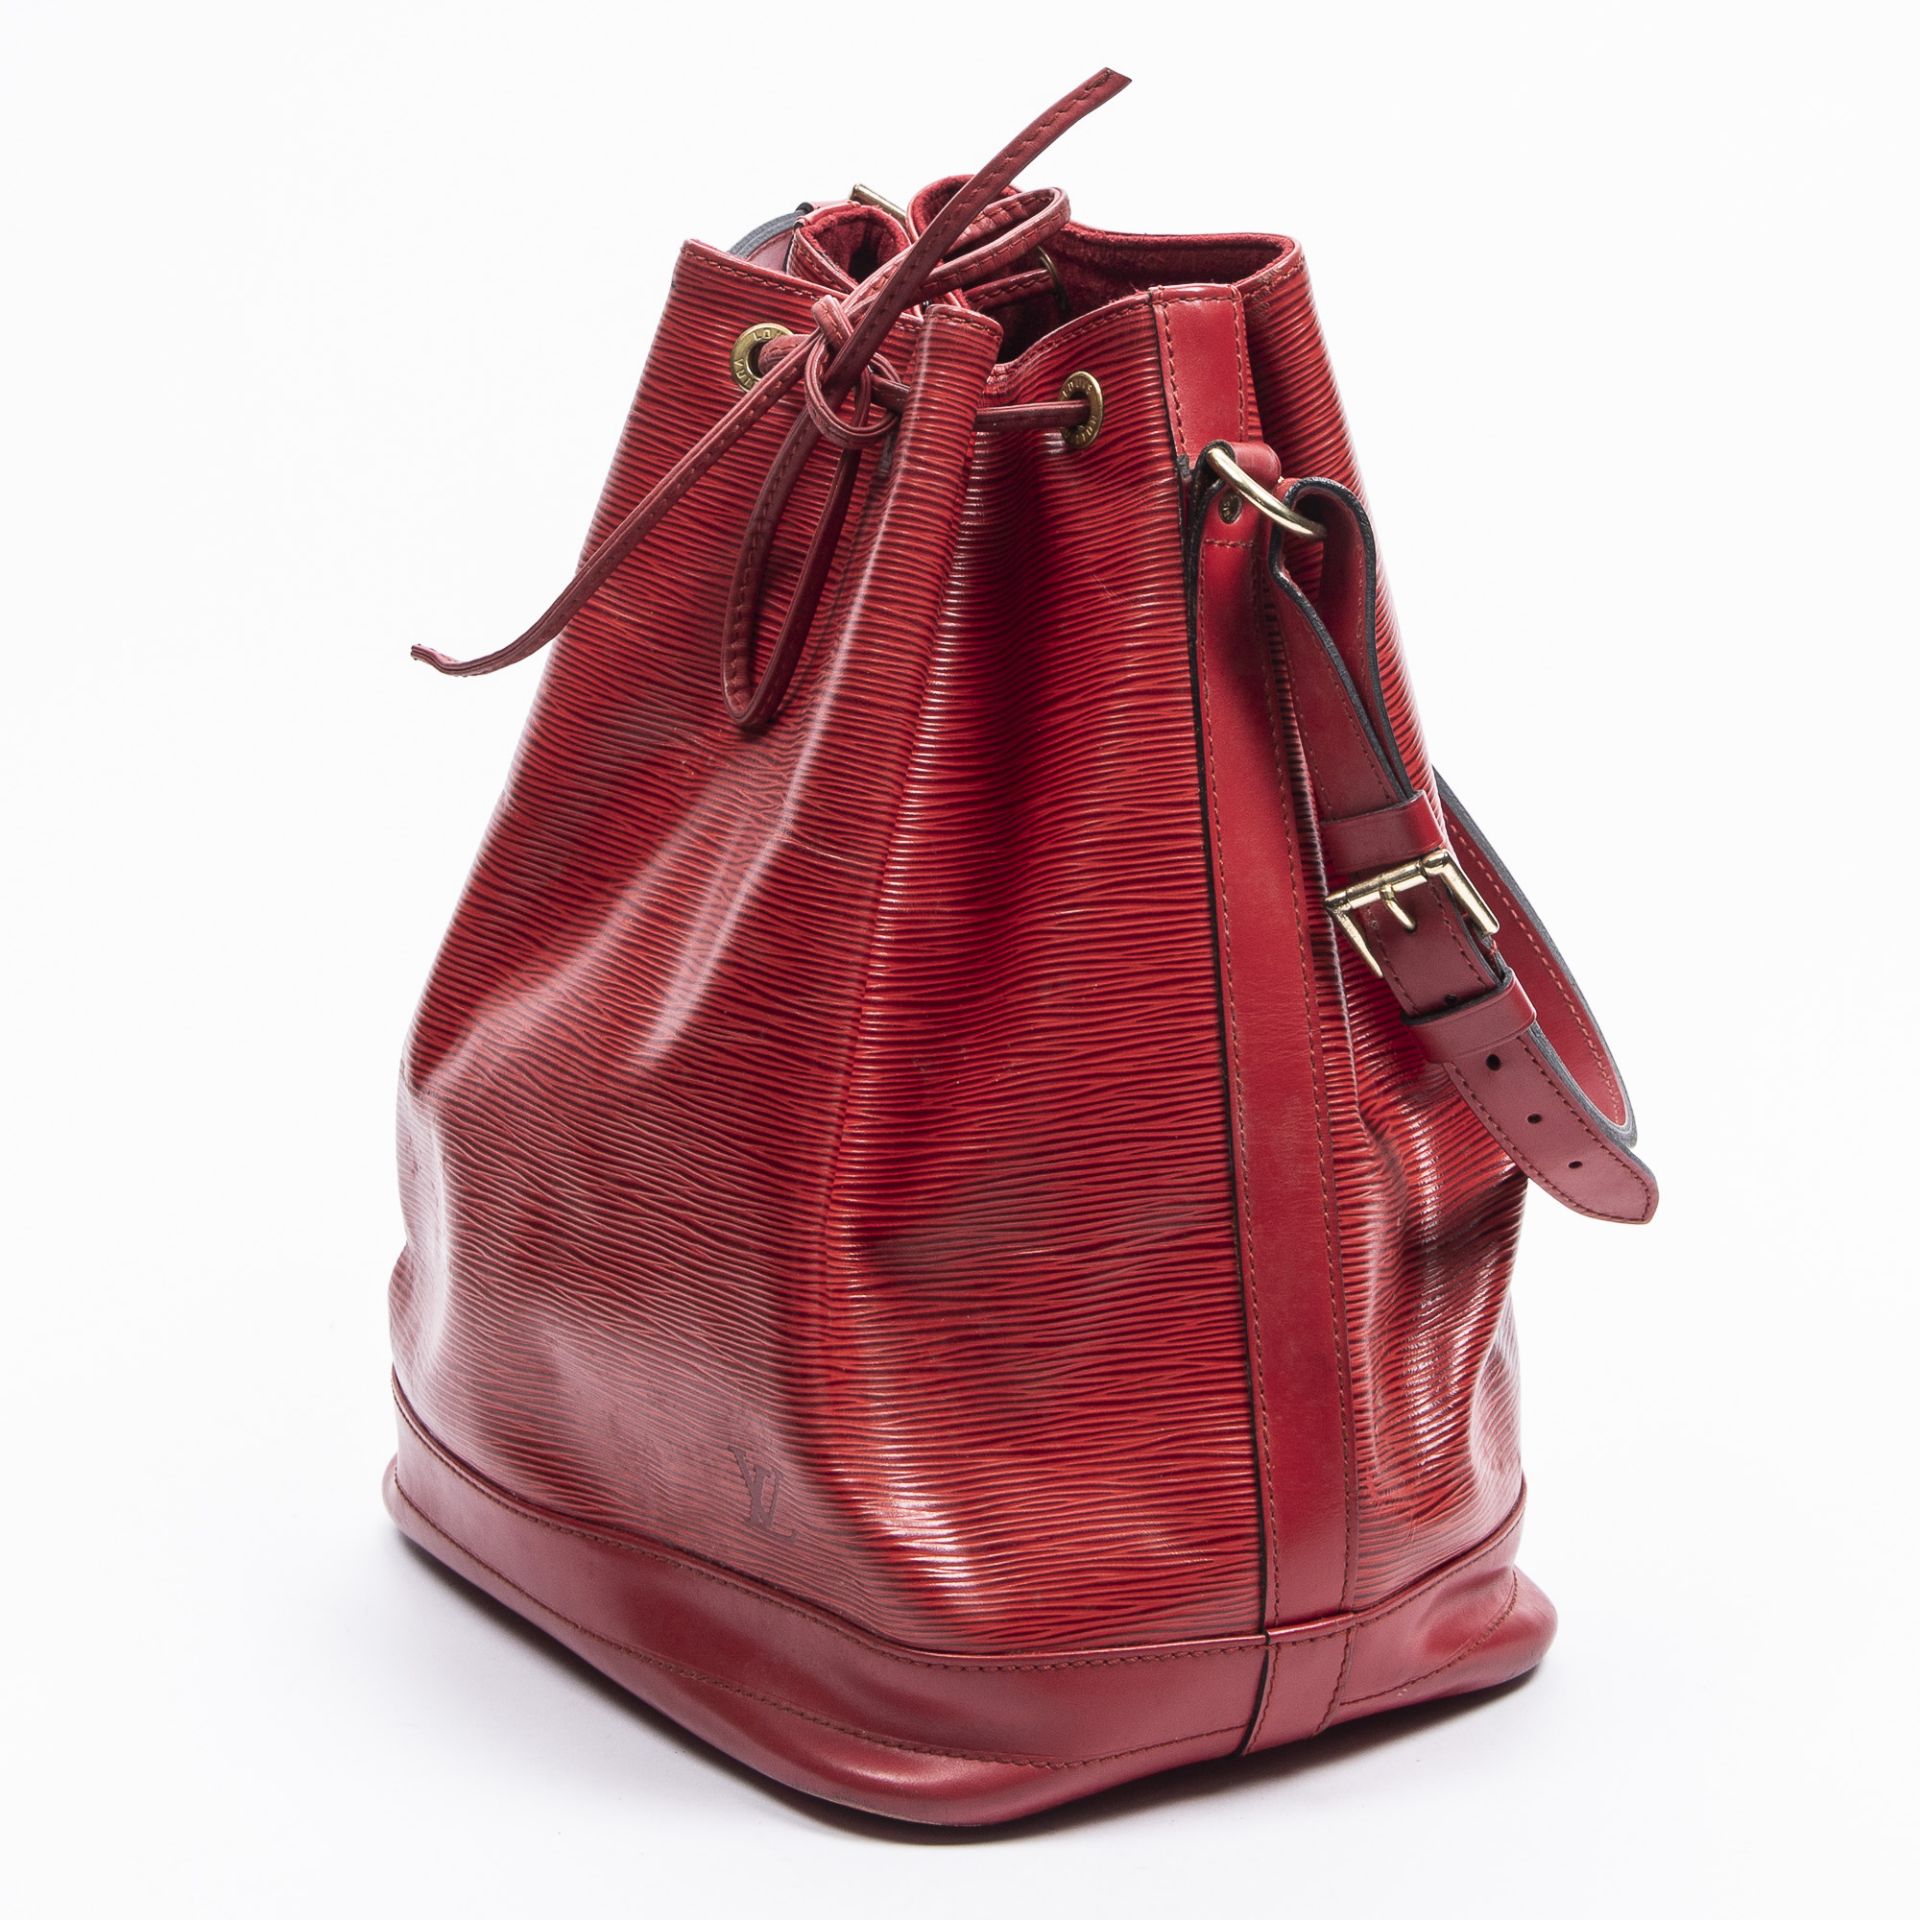 RRP £1,700.00 Lot To Contain 1 Louis Vuitton Calf Leather Noe Shoulder Bag In Red - 27*34*16cm - - Image 2 of 3